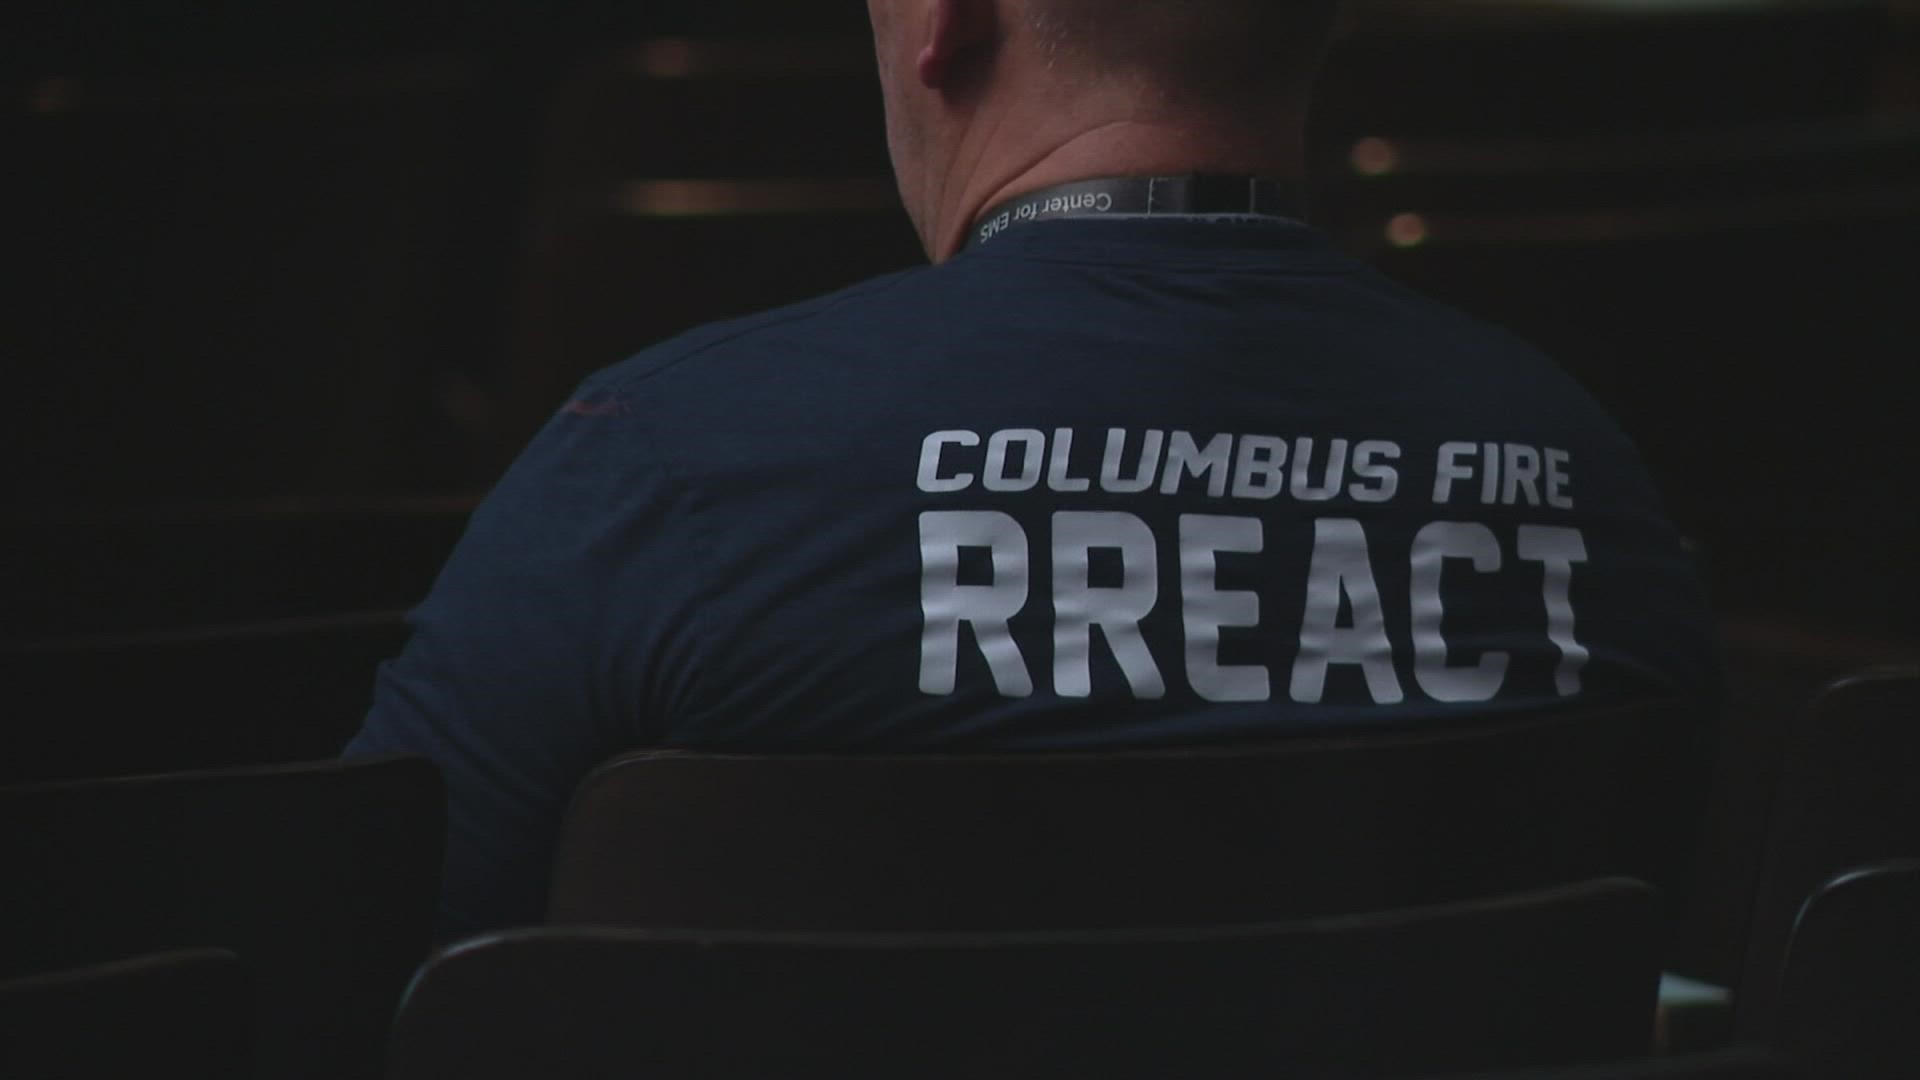 "Helping the people who help the people" - the theme of a new mental health training session offered to Columbus firefighters.